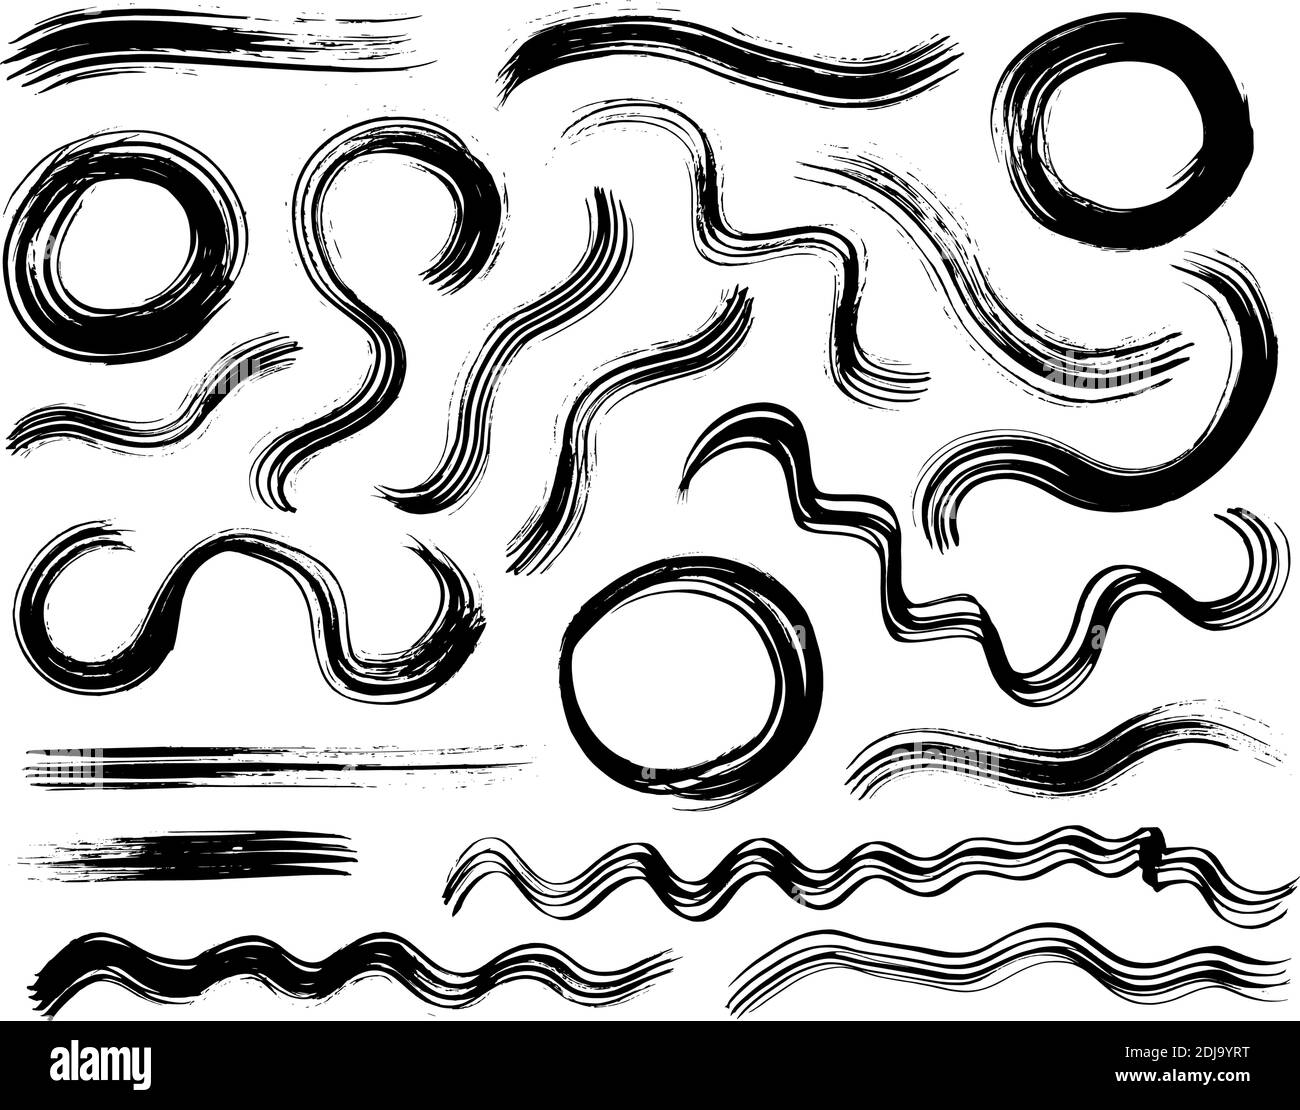 Curved black paint brush strokes with circles. Stock Vector